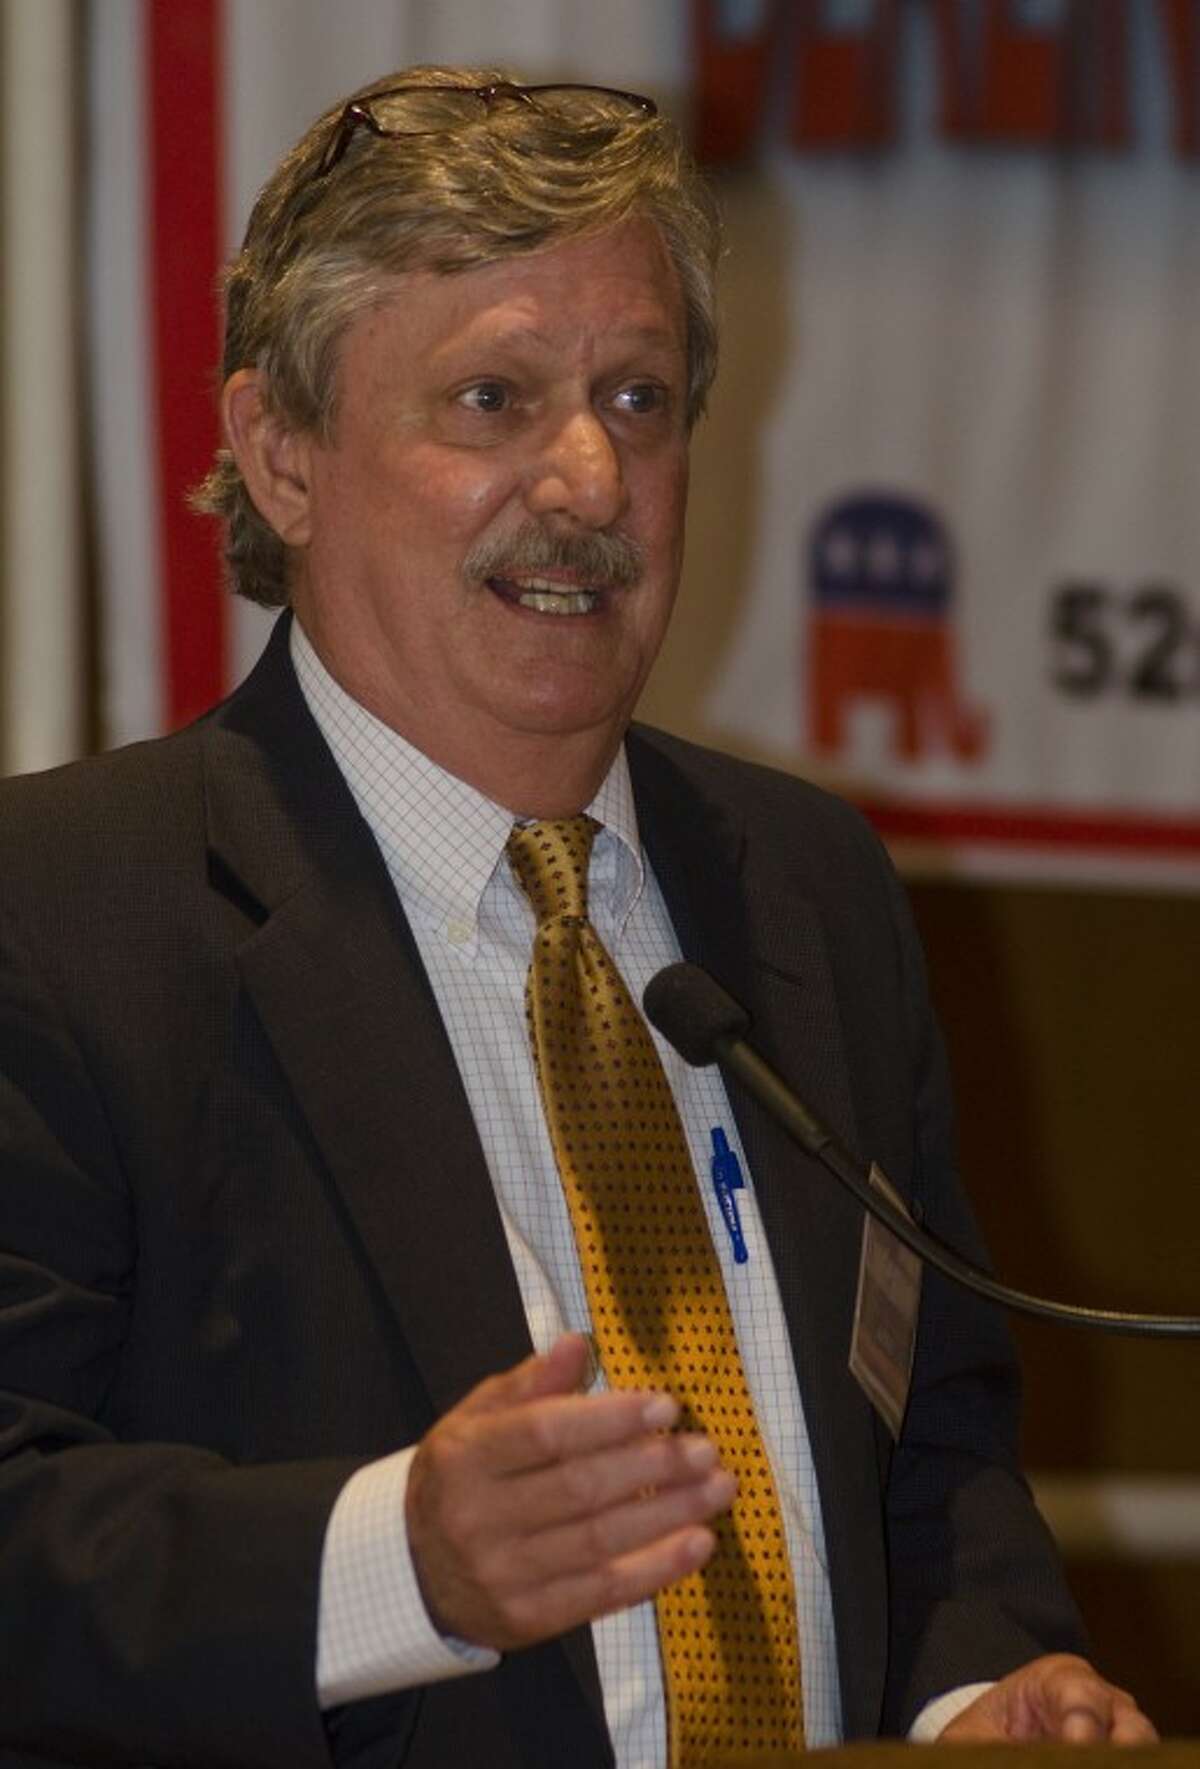 (File Photo) David Lindemood, candidate for 238th Districk Court, speaks Wednesday at the Midland County Republican Women's luncheon. Photo by Tim Fischer\ Reporter-Telegram